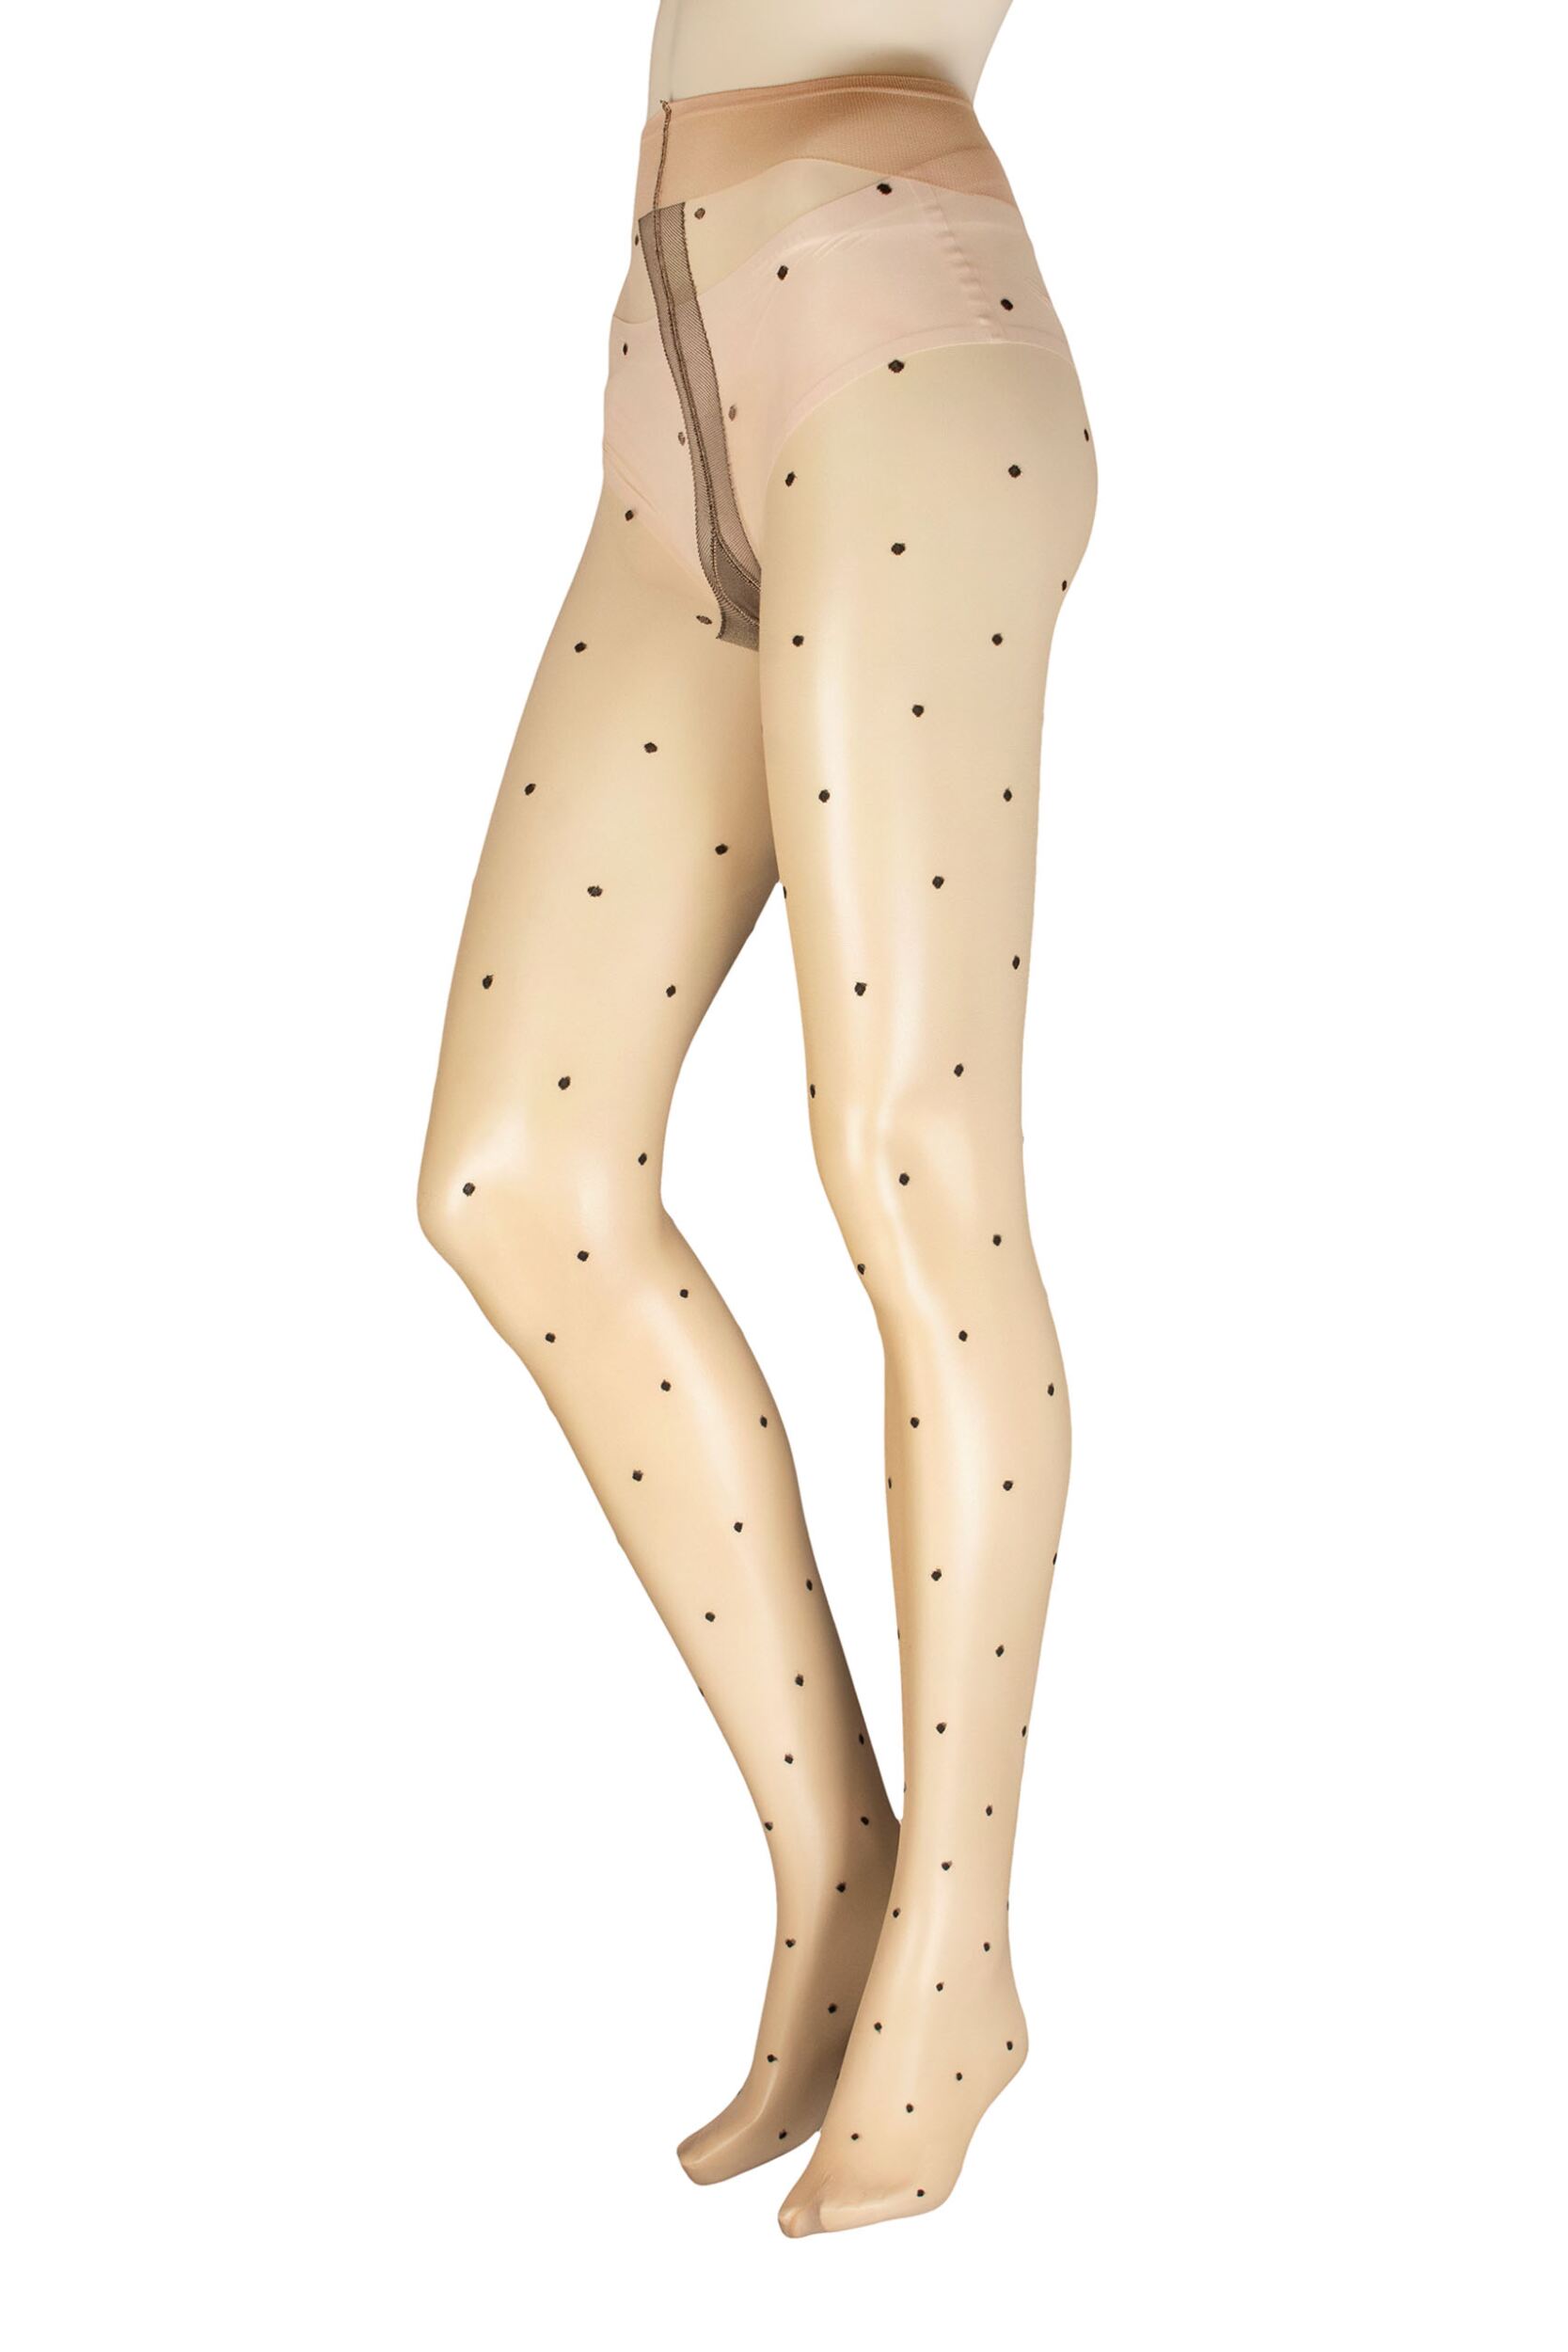 Ladies 1 Pair Trasparenze Anguria Spotted Tights Cosmetic Small